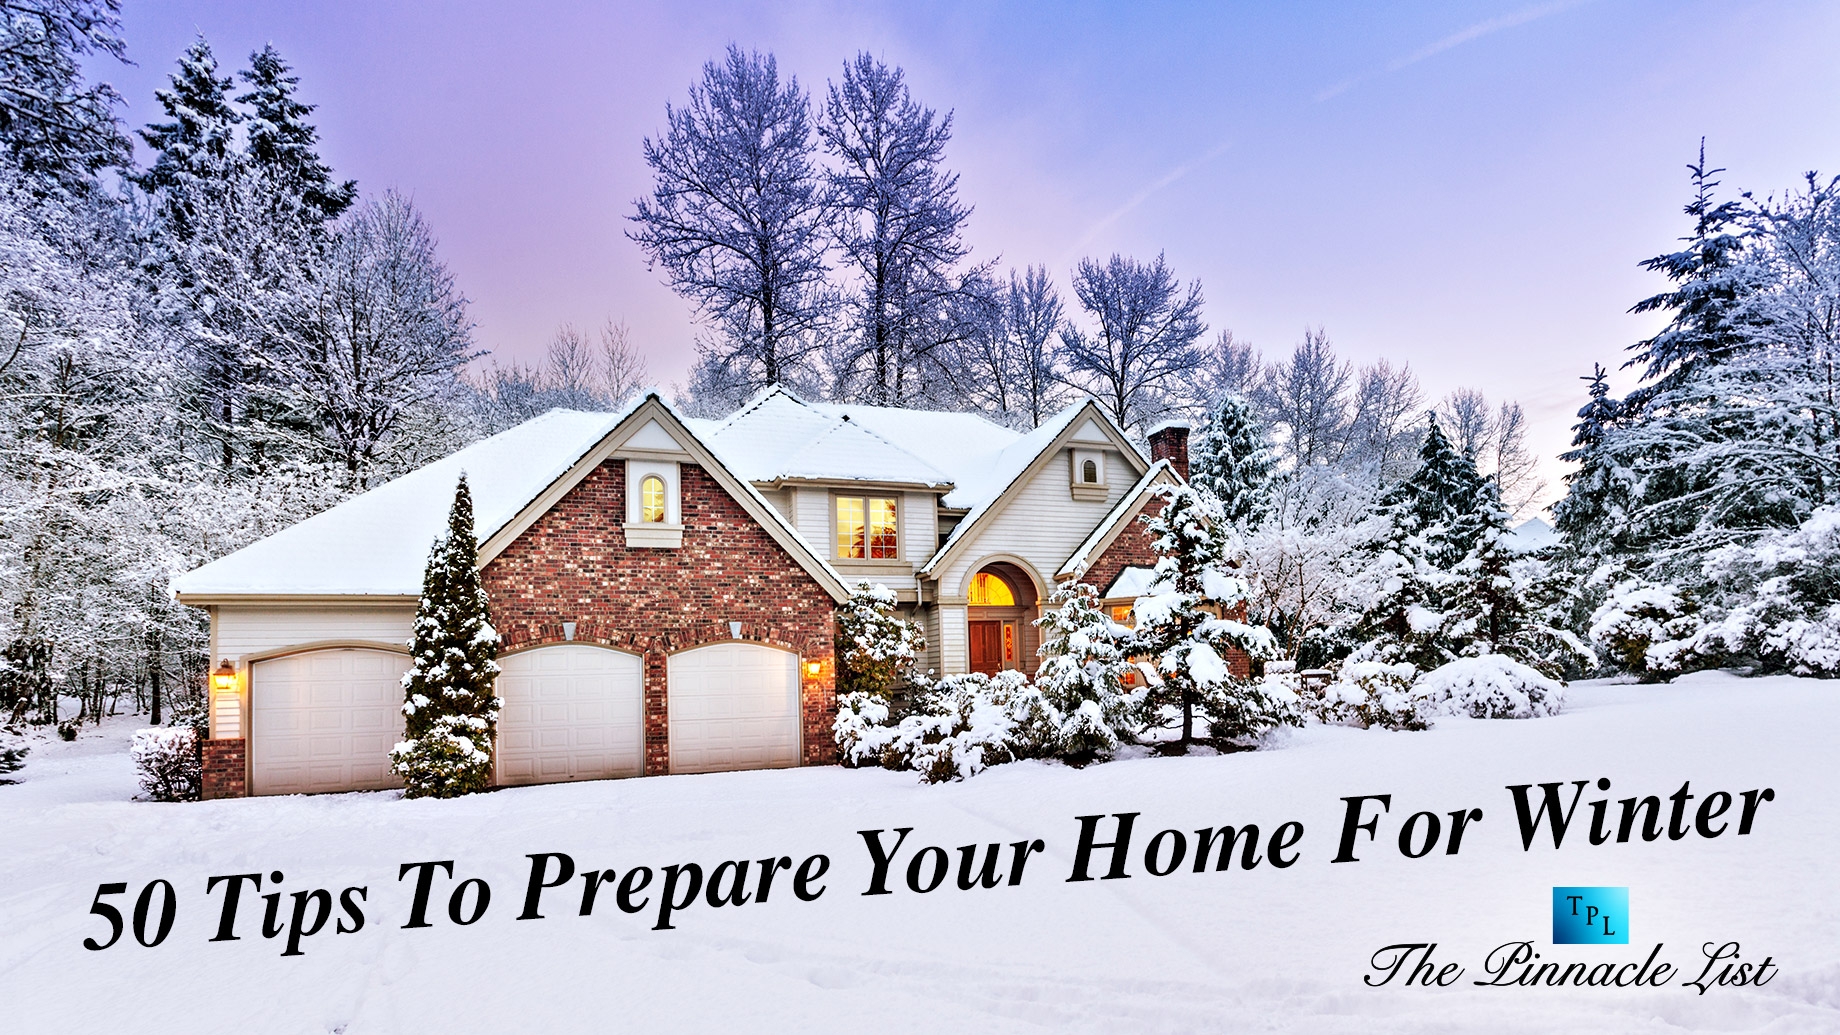 50 Tips To Prepare Your Home For Winter